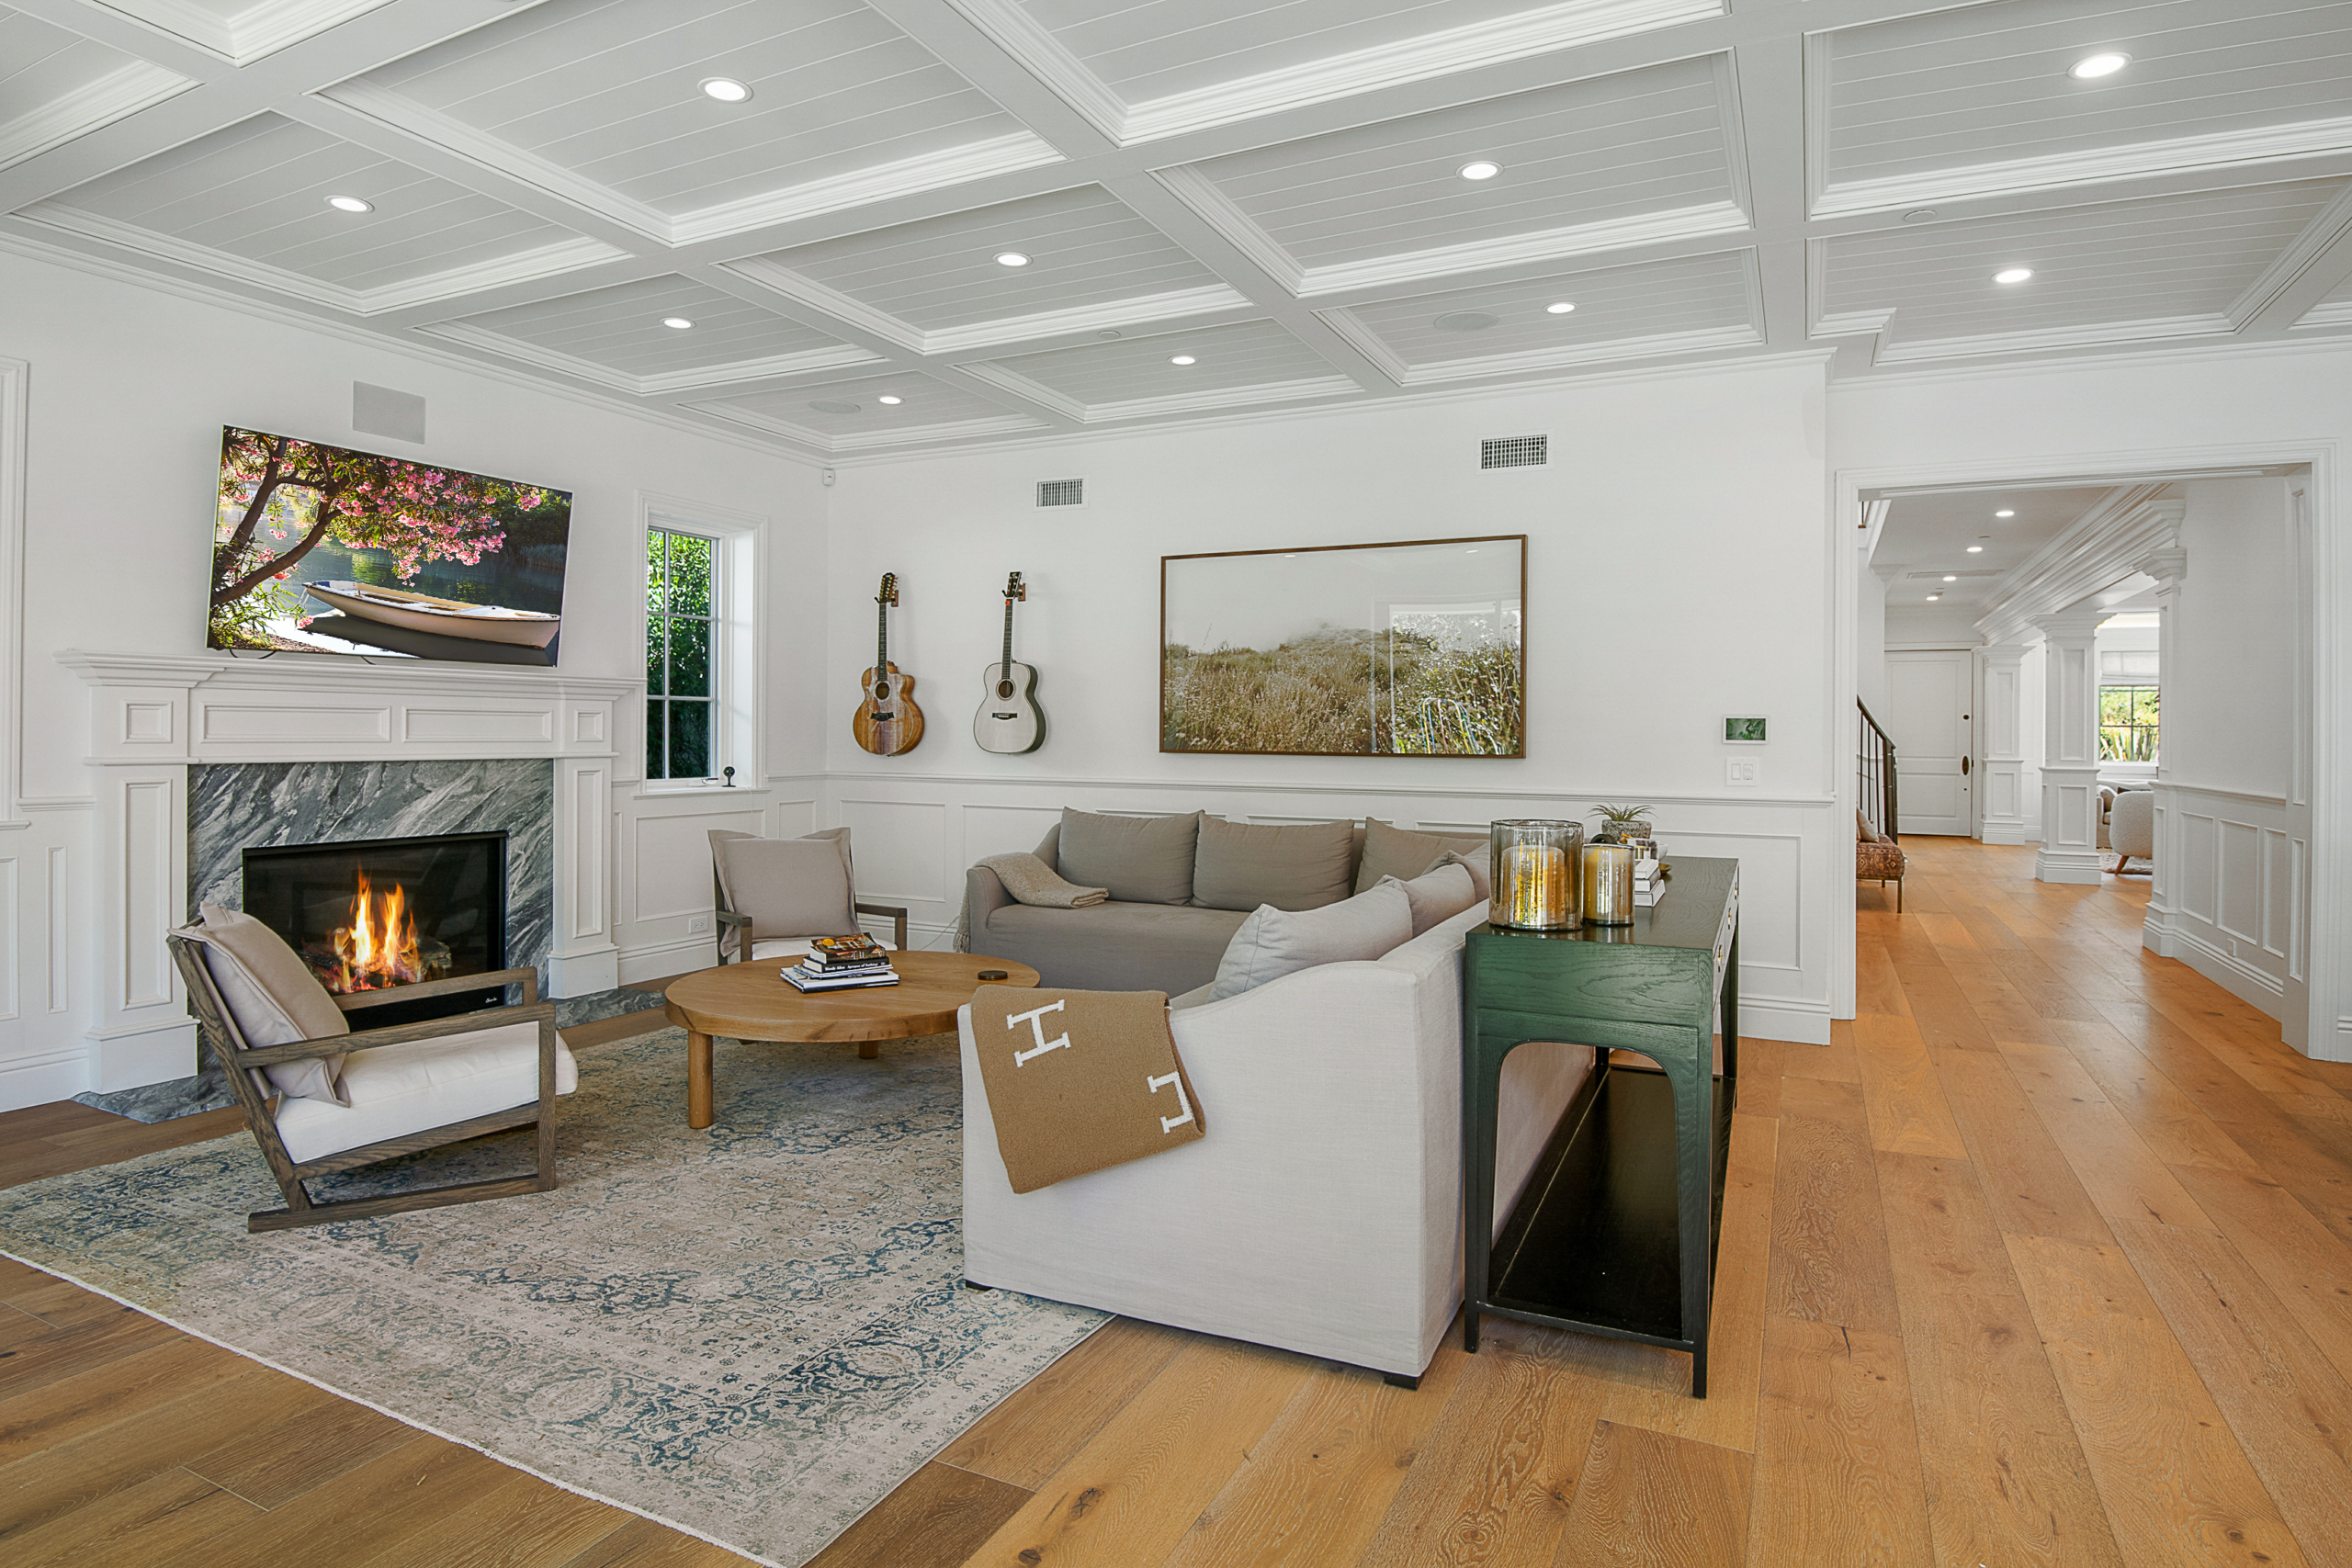 Living room area with white beamed ceiling, recessed lights, fireplace and light hardwood floors